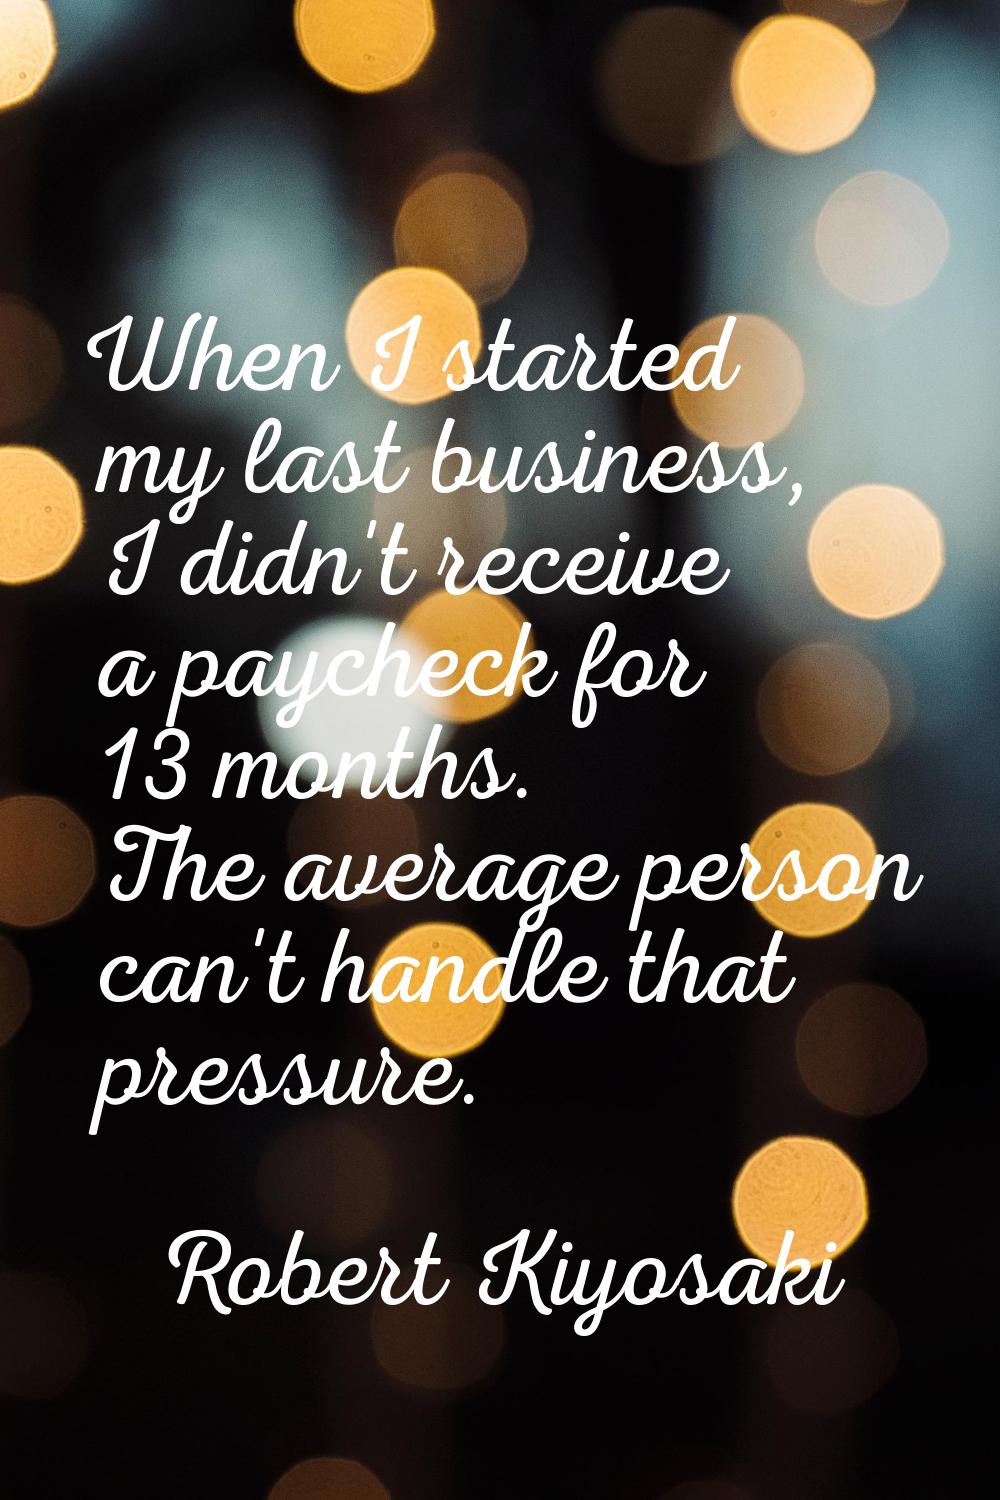 When I started my last business, I didn't receive a paycheck for 13 months. The average person can'